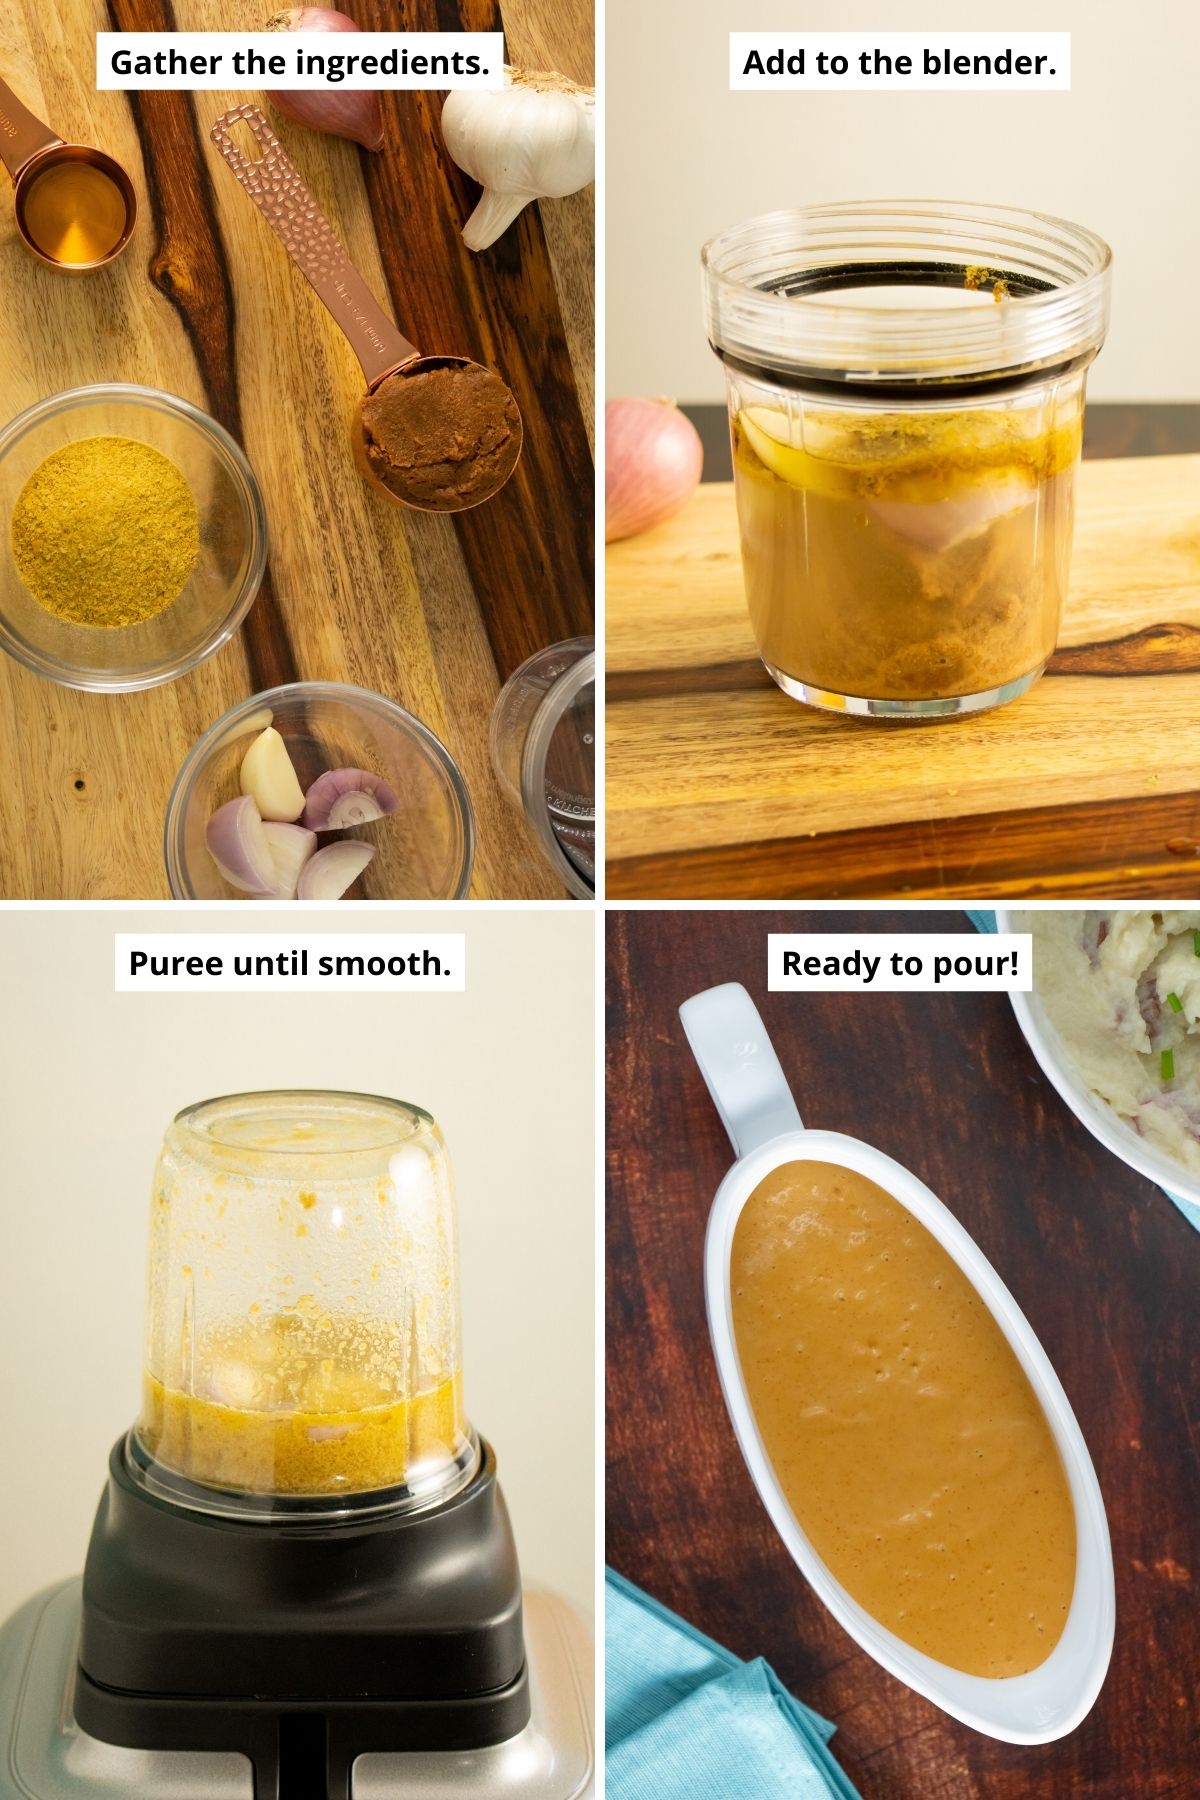 image collage showing miso, nutritional yeast, and other gravy ingredients on a wooden table, in the blender, and then the blended gravy in a gravy boat